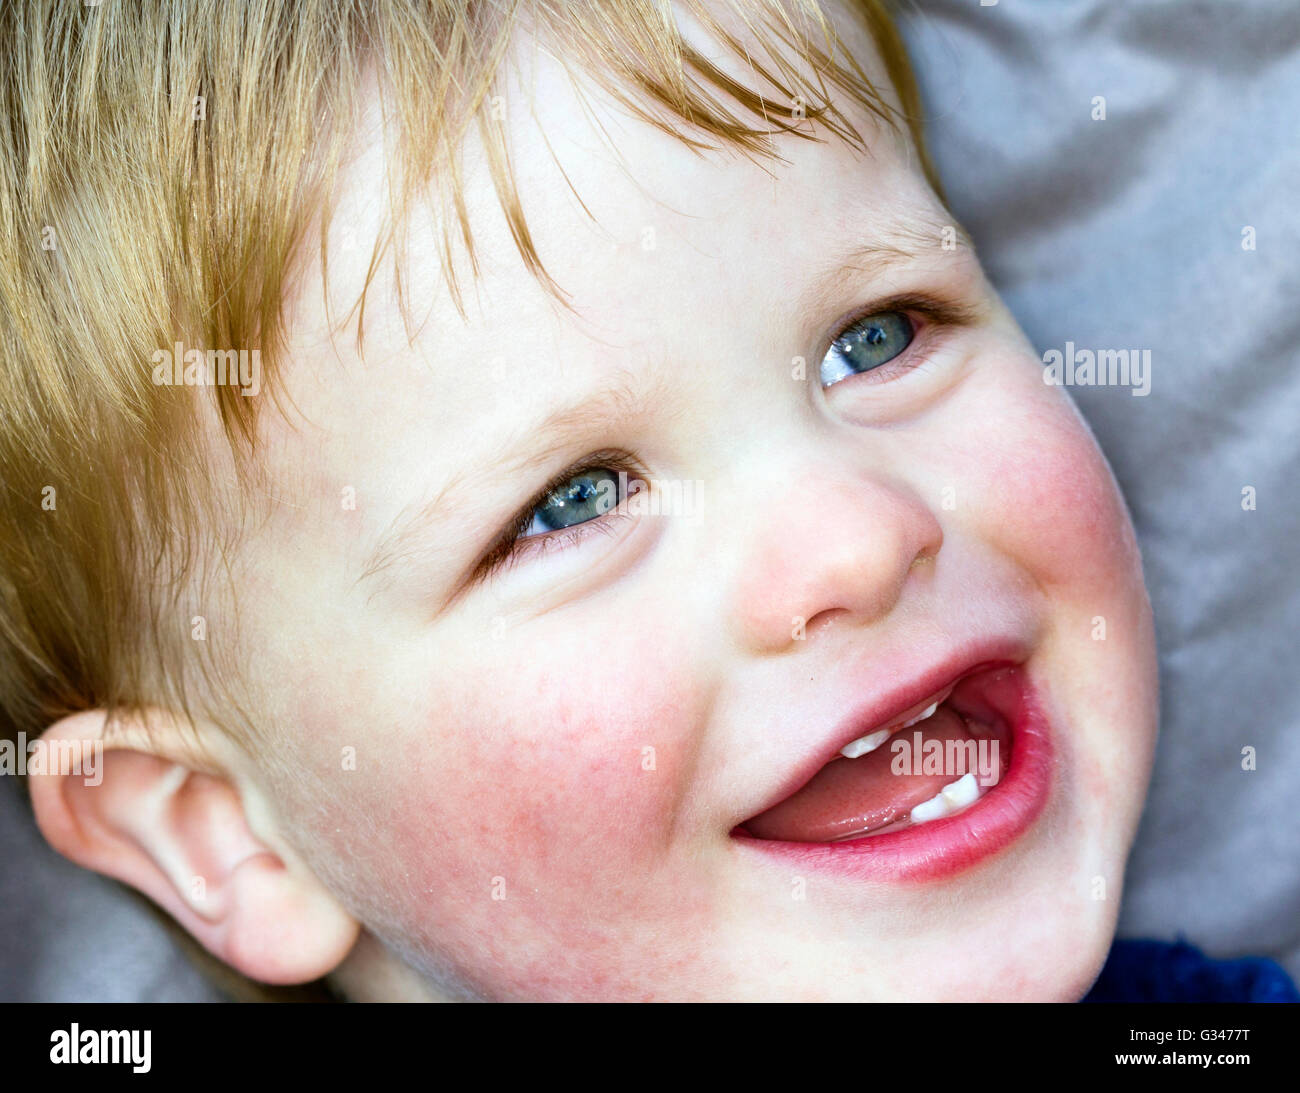 Young boy smiling Stock Photo